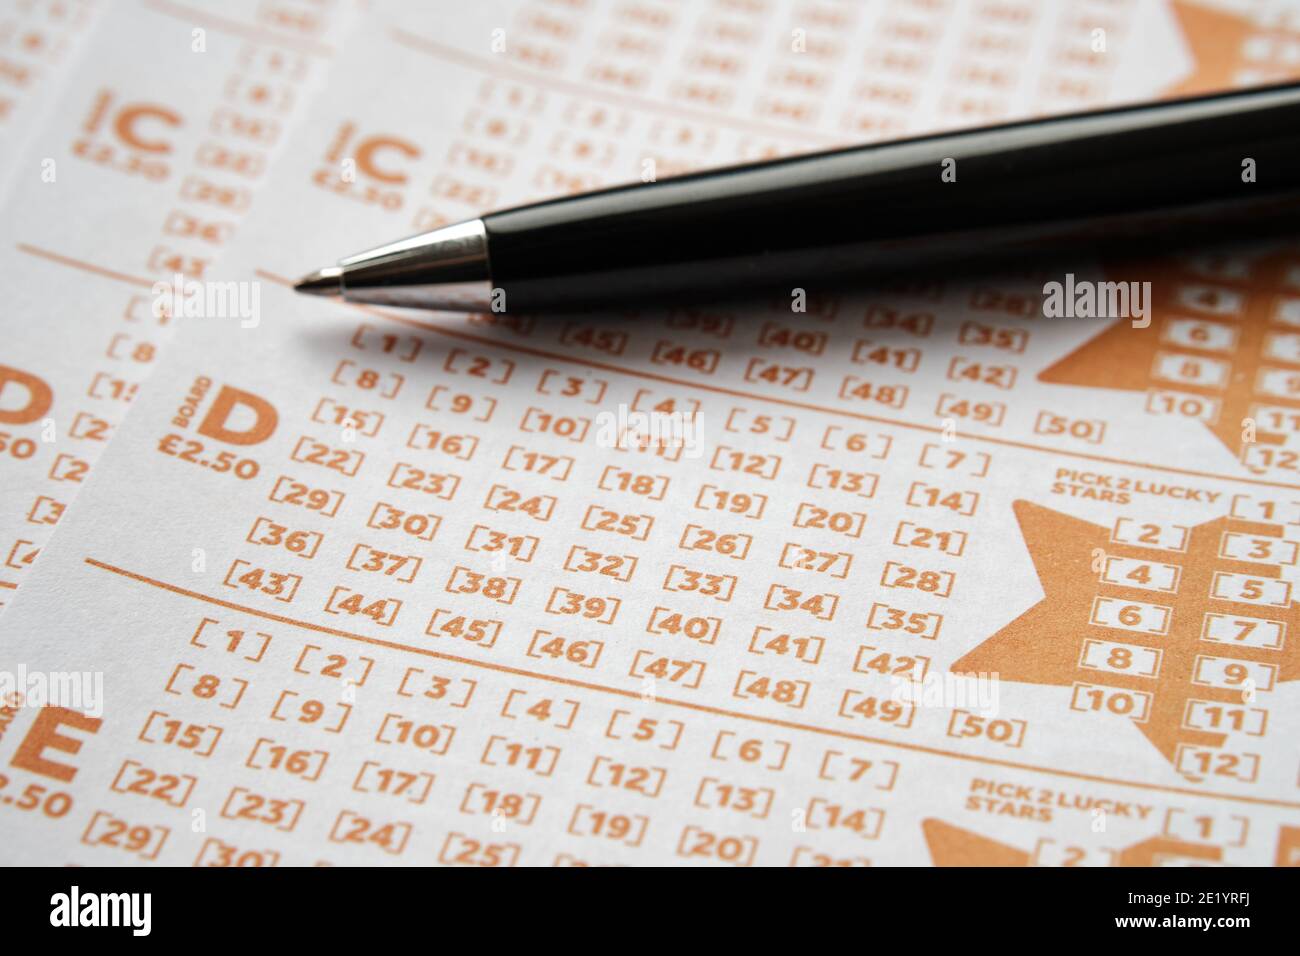 Stafford, United Kingdom - November 10 2020: EuroMillions lottery cards and pen. EuroMillions is Europe's biggest lottery. Concept. Stock Photo